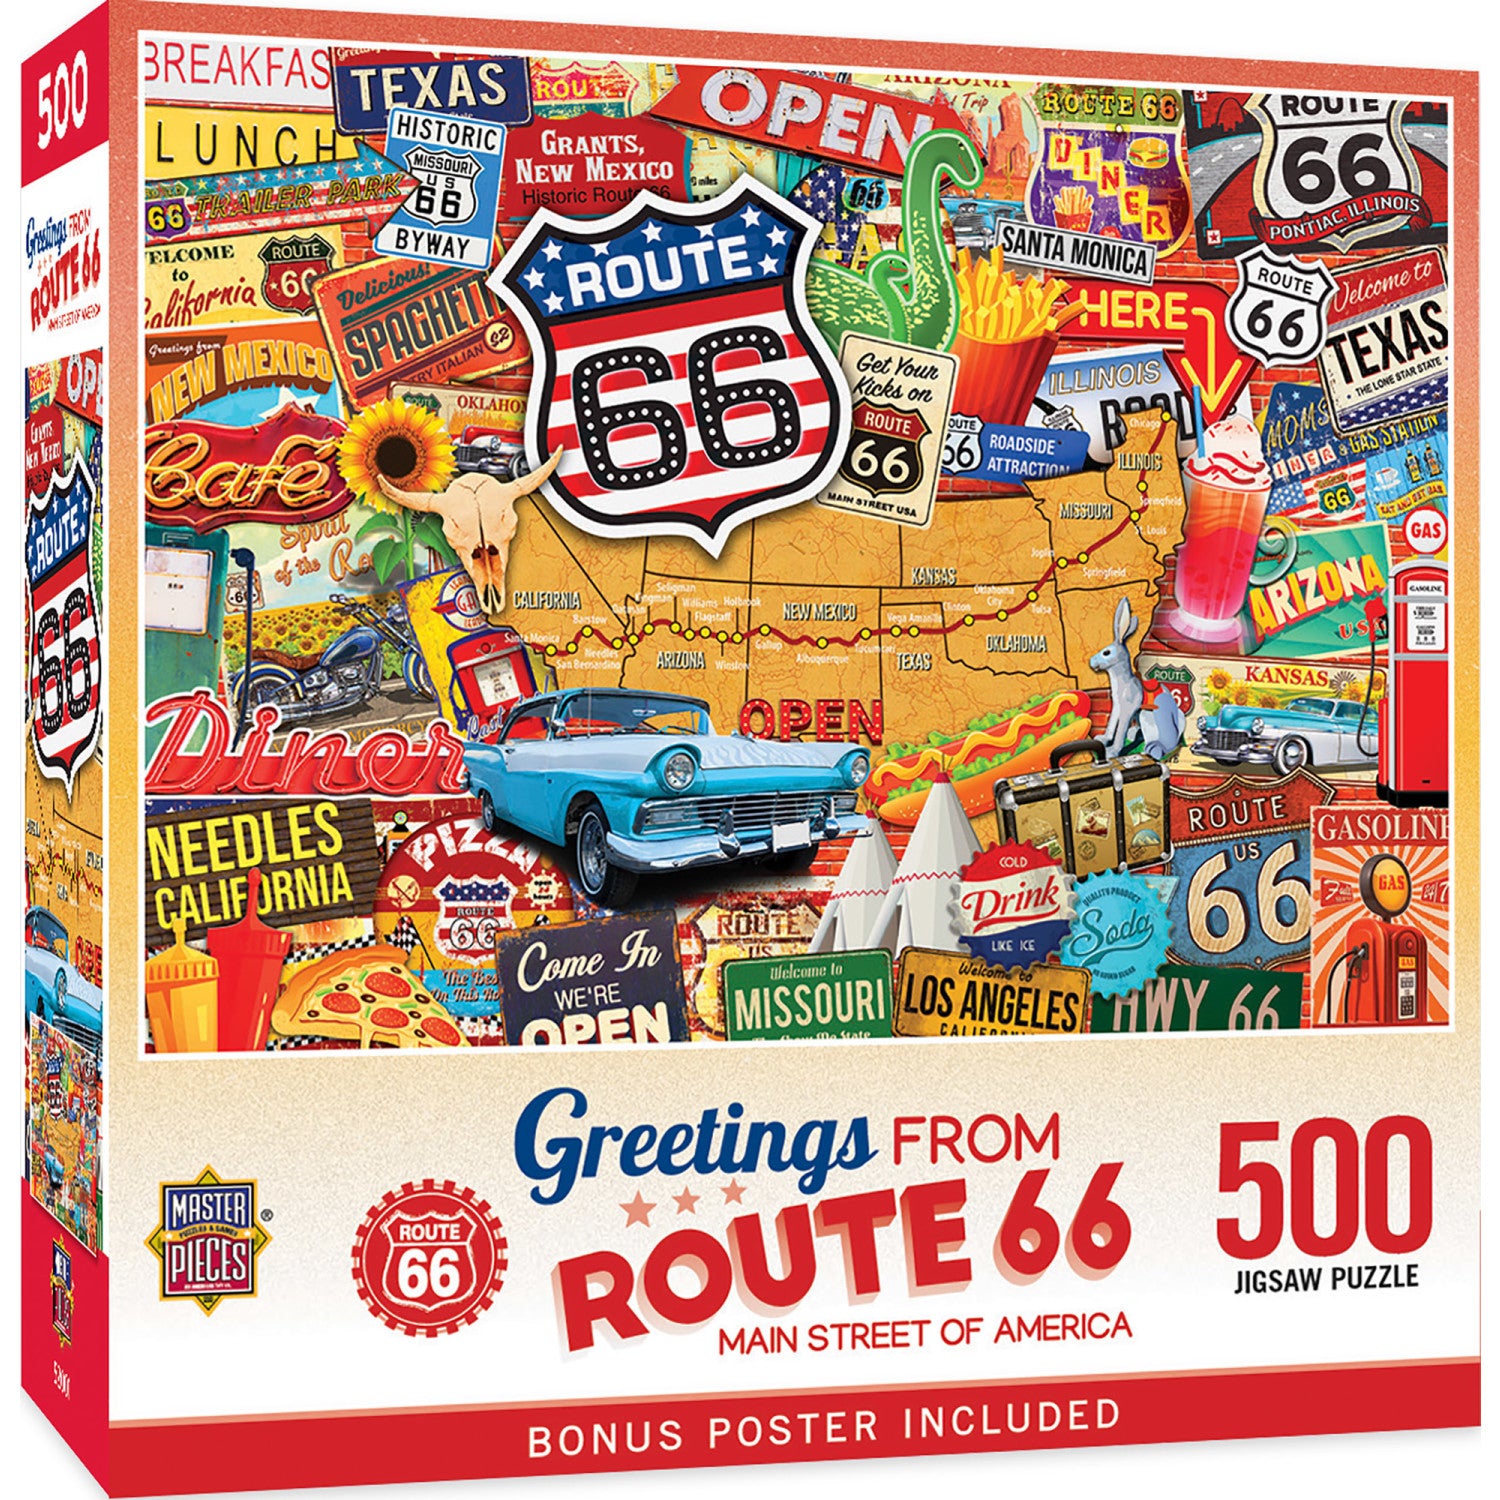 Greetings From Route 66 - 500 Piece Jigsaw Puzzle